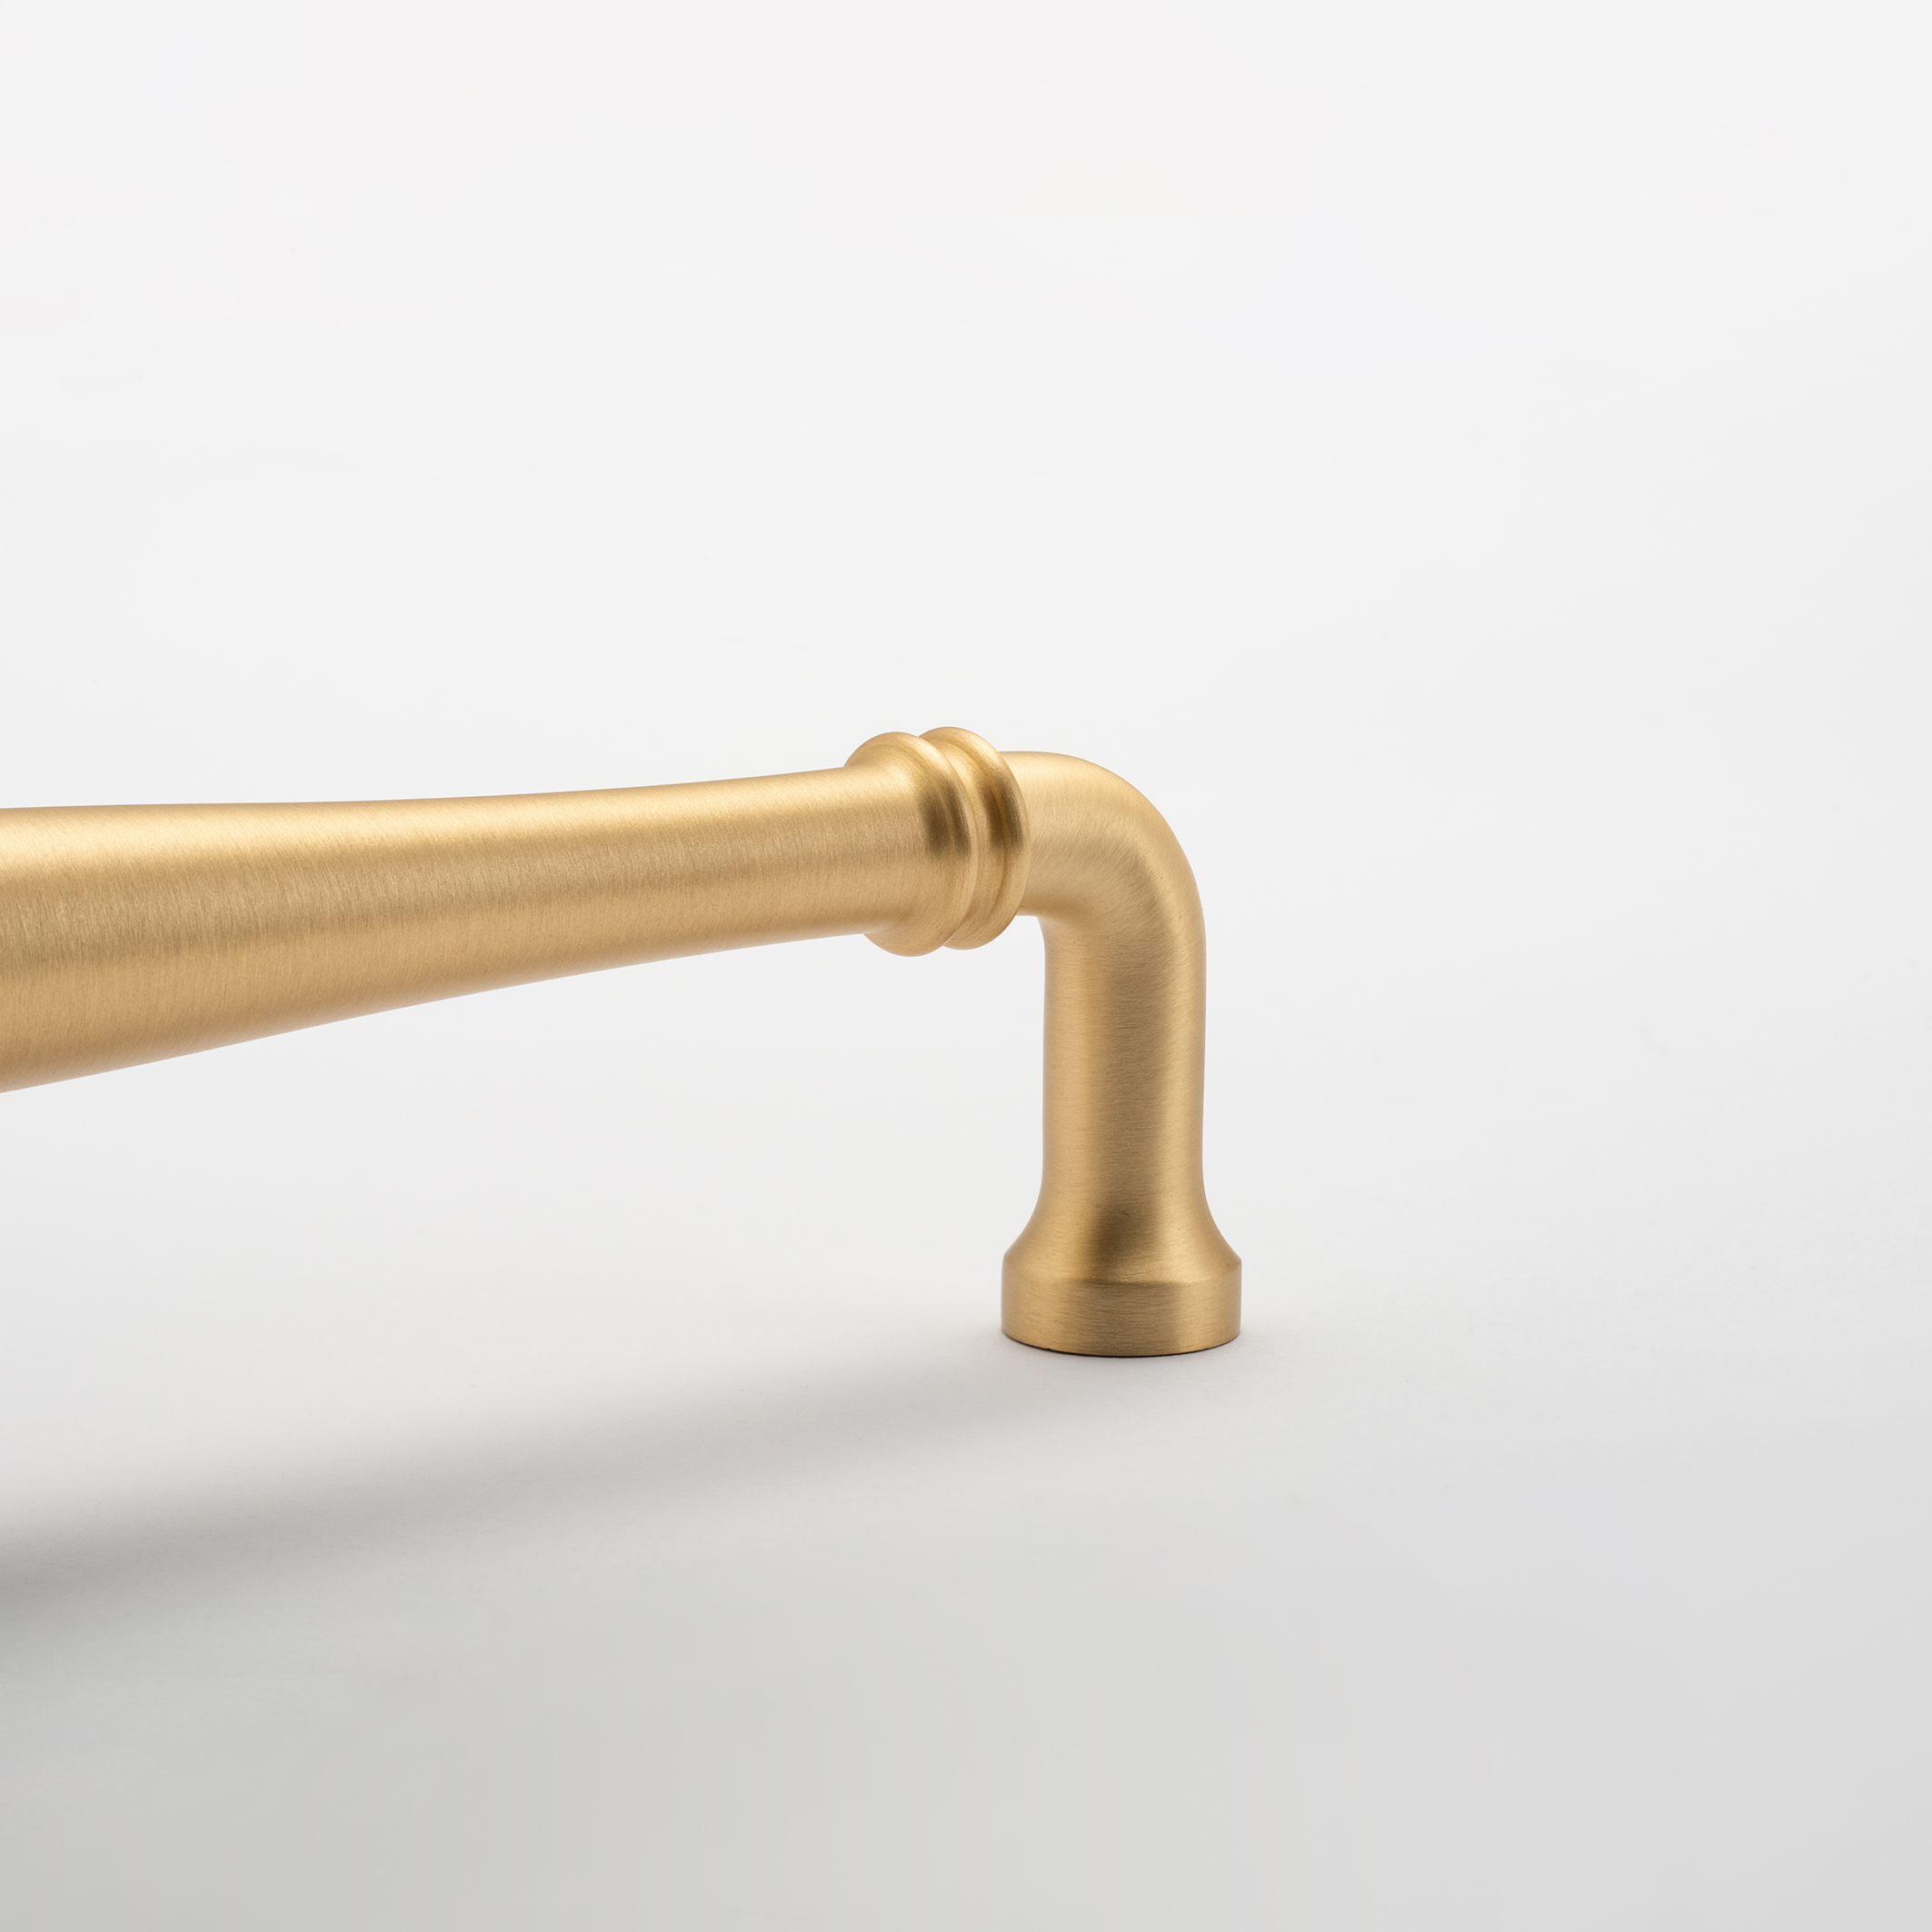 21096 - Sarlat Cabinet Pull - CTC320mm - Brushed Brass